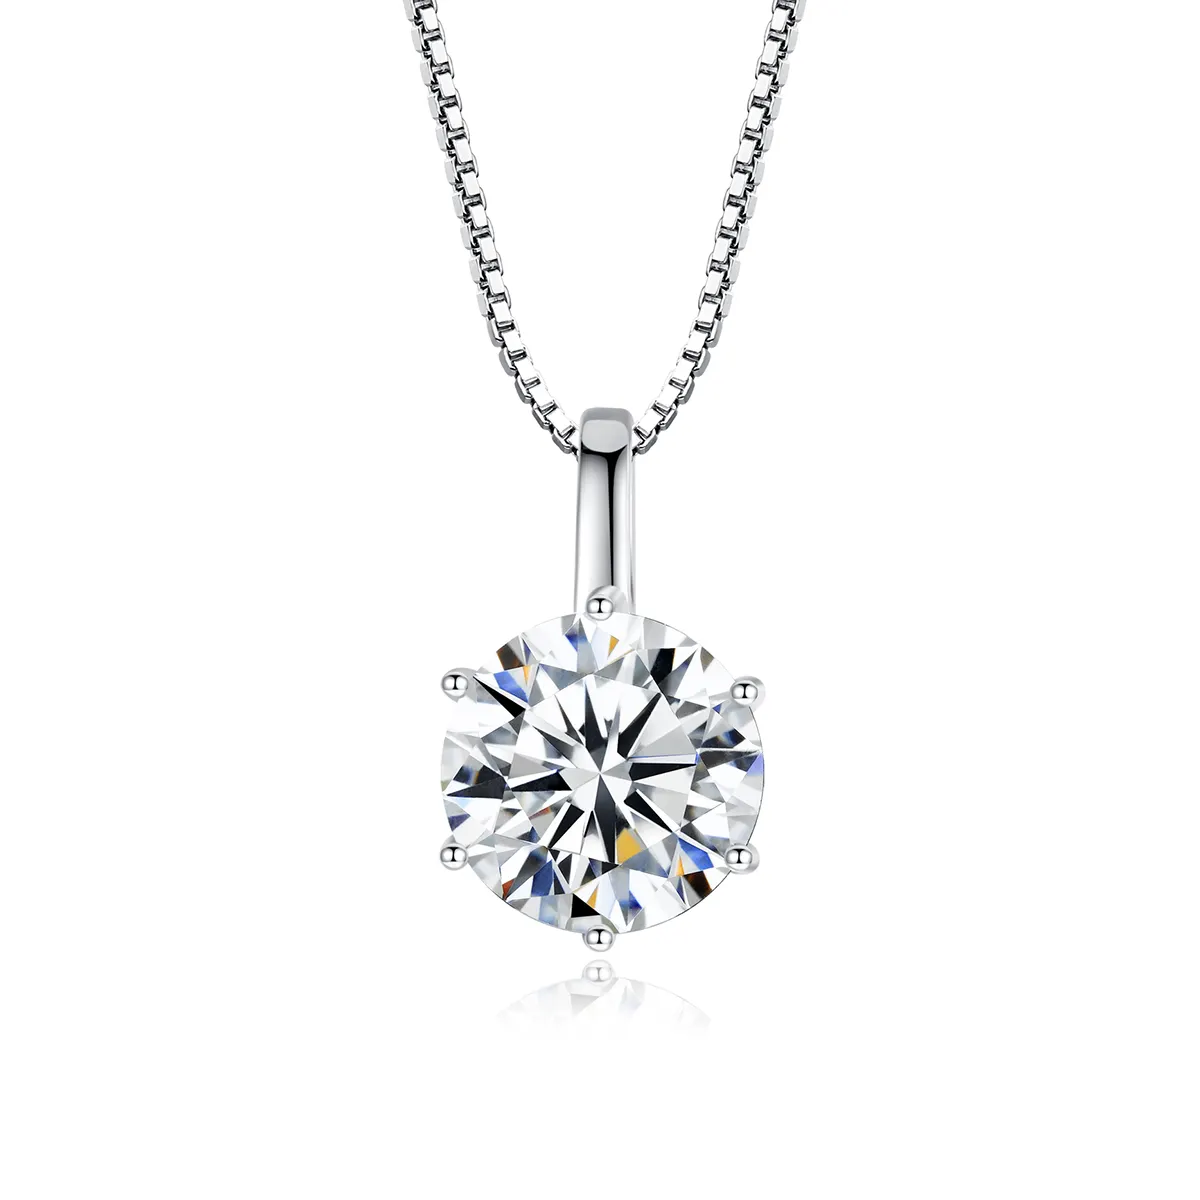 CZCITY Moissanite Pendant Necklace S925 Sterling Silver Chain Diamond Round Moissanite Necklace Jewelry for Women